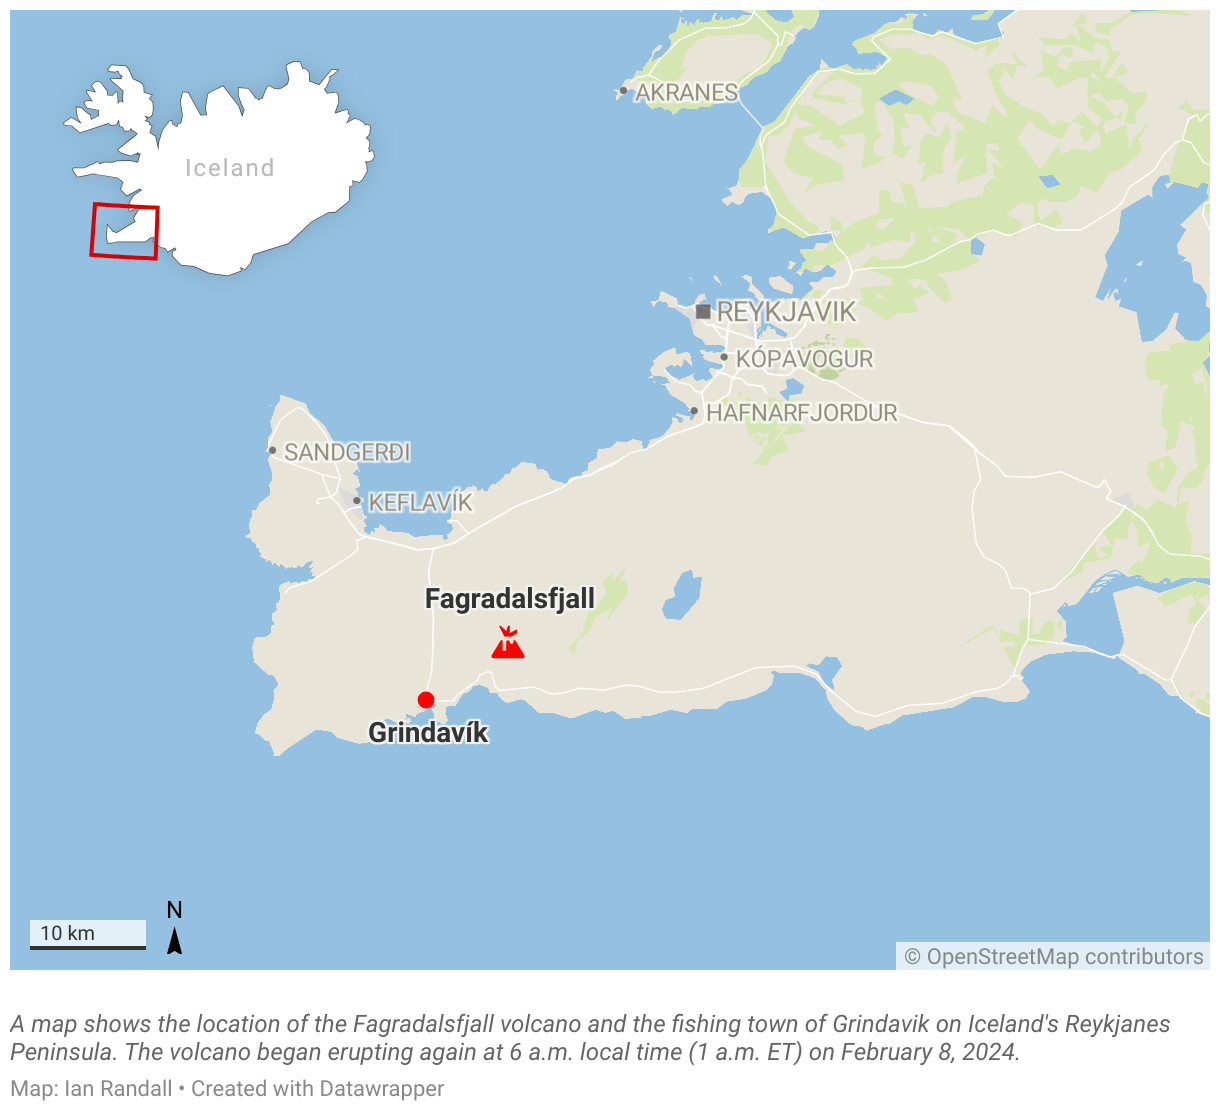 A map shows the location of the Fagradalsfjall volcano and the fishing town of Grindavik on Iceland's Reykjanes Peninsula.